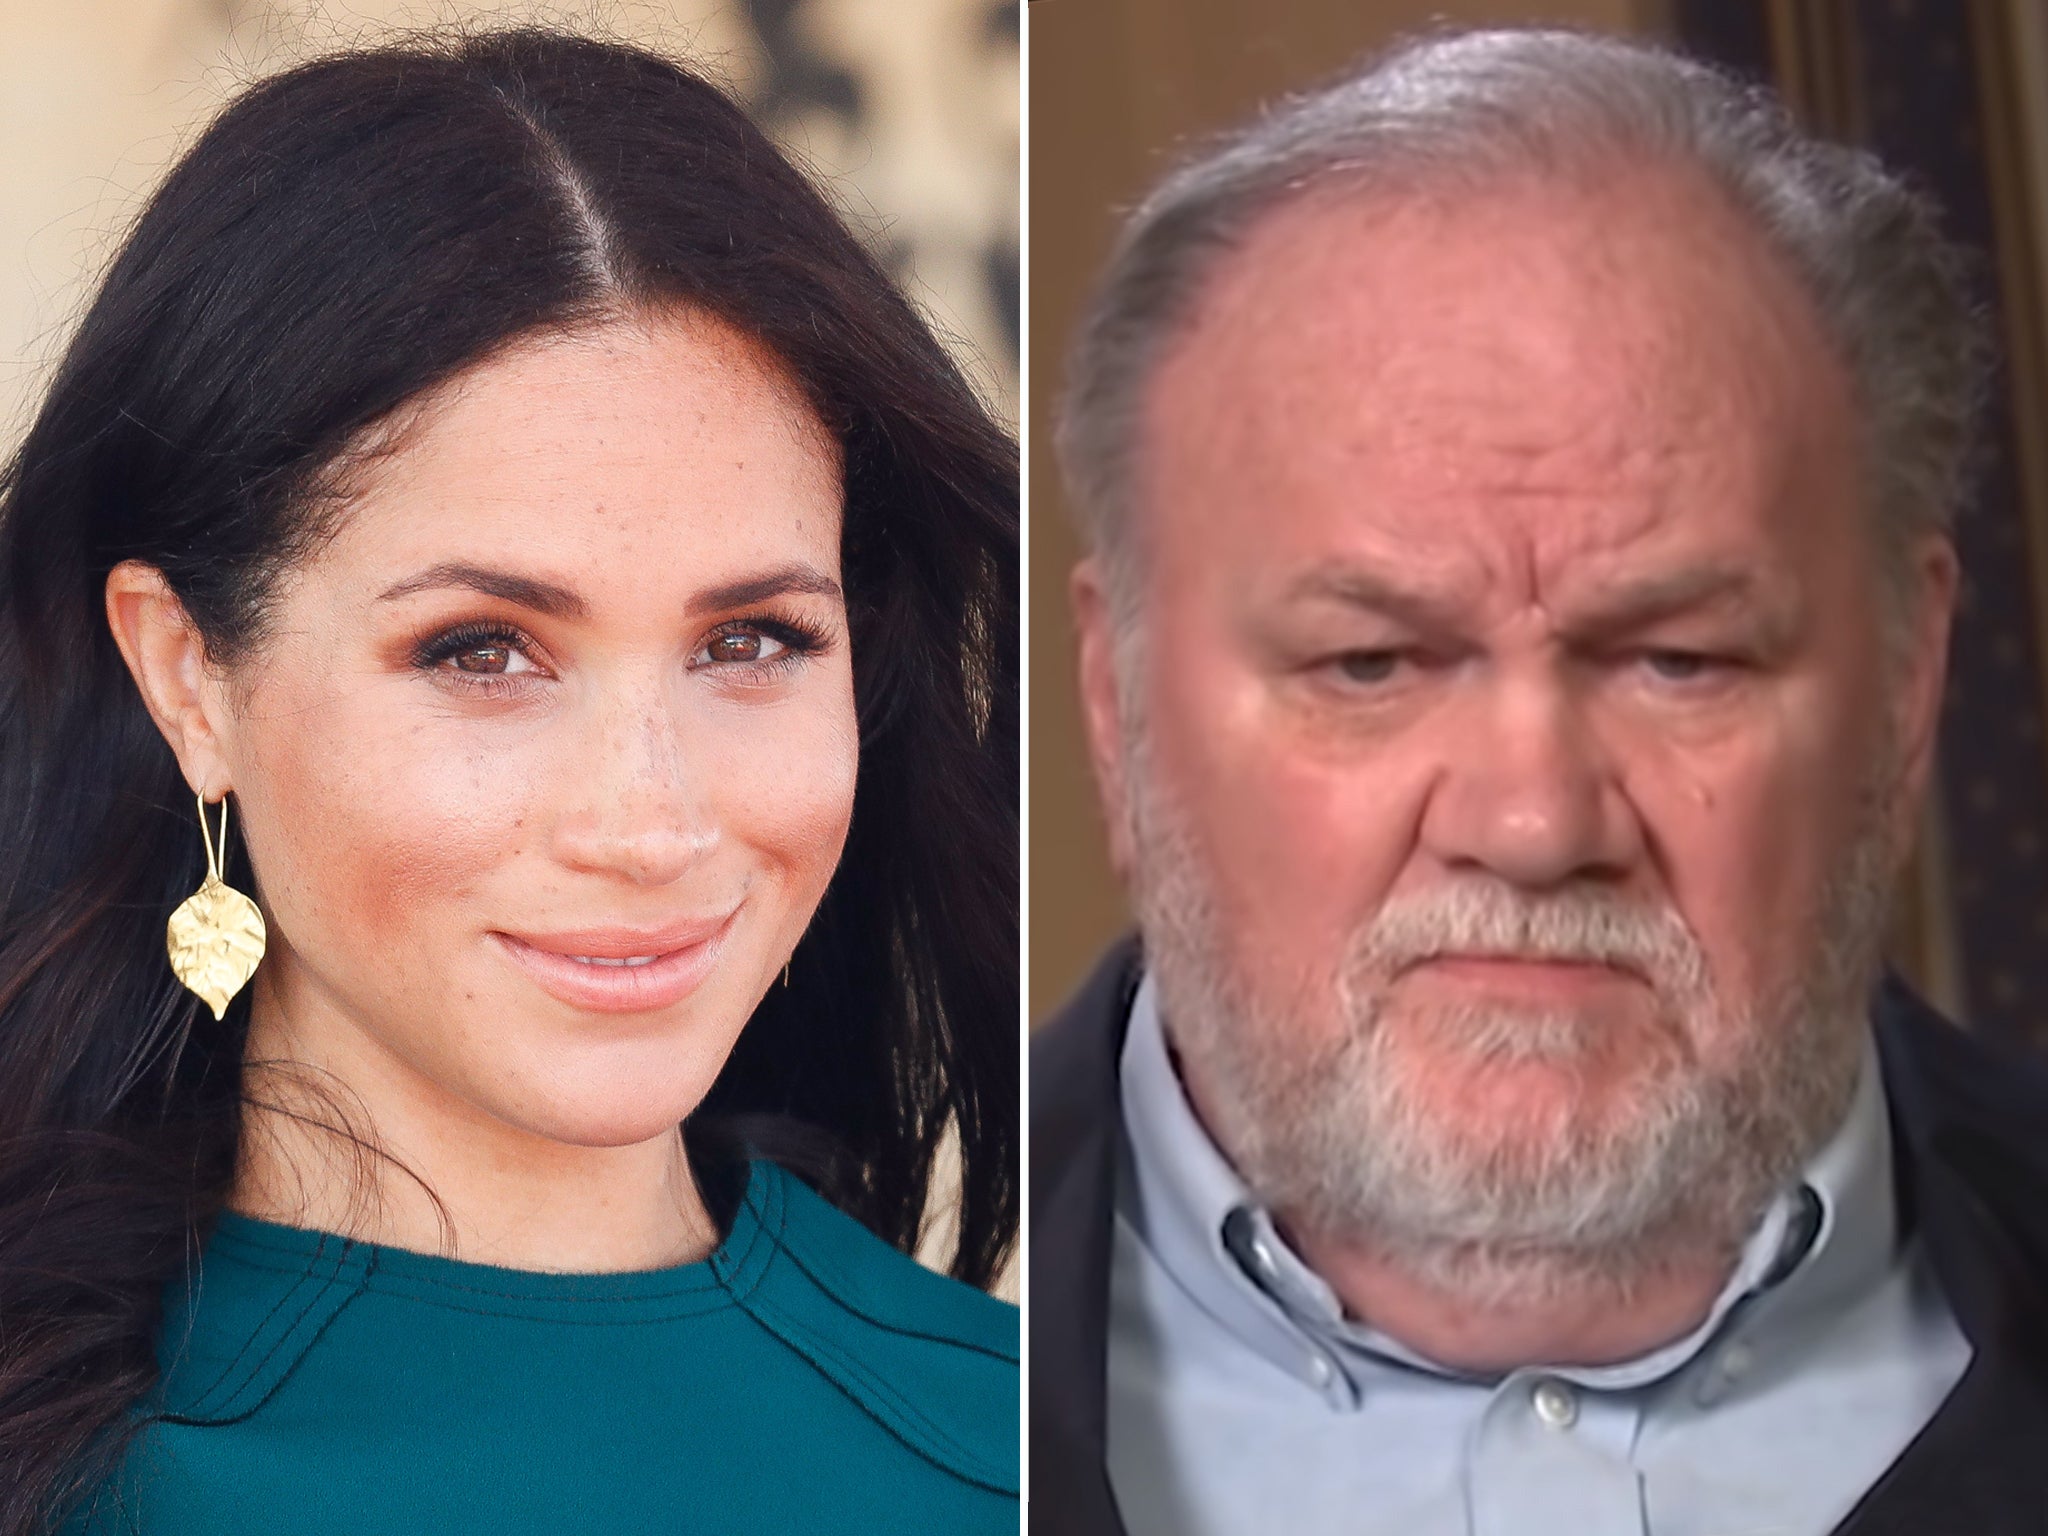 Meghan is estranged from her father, Thomas